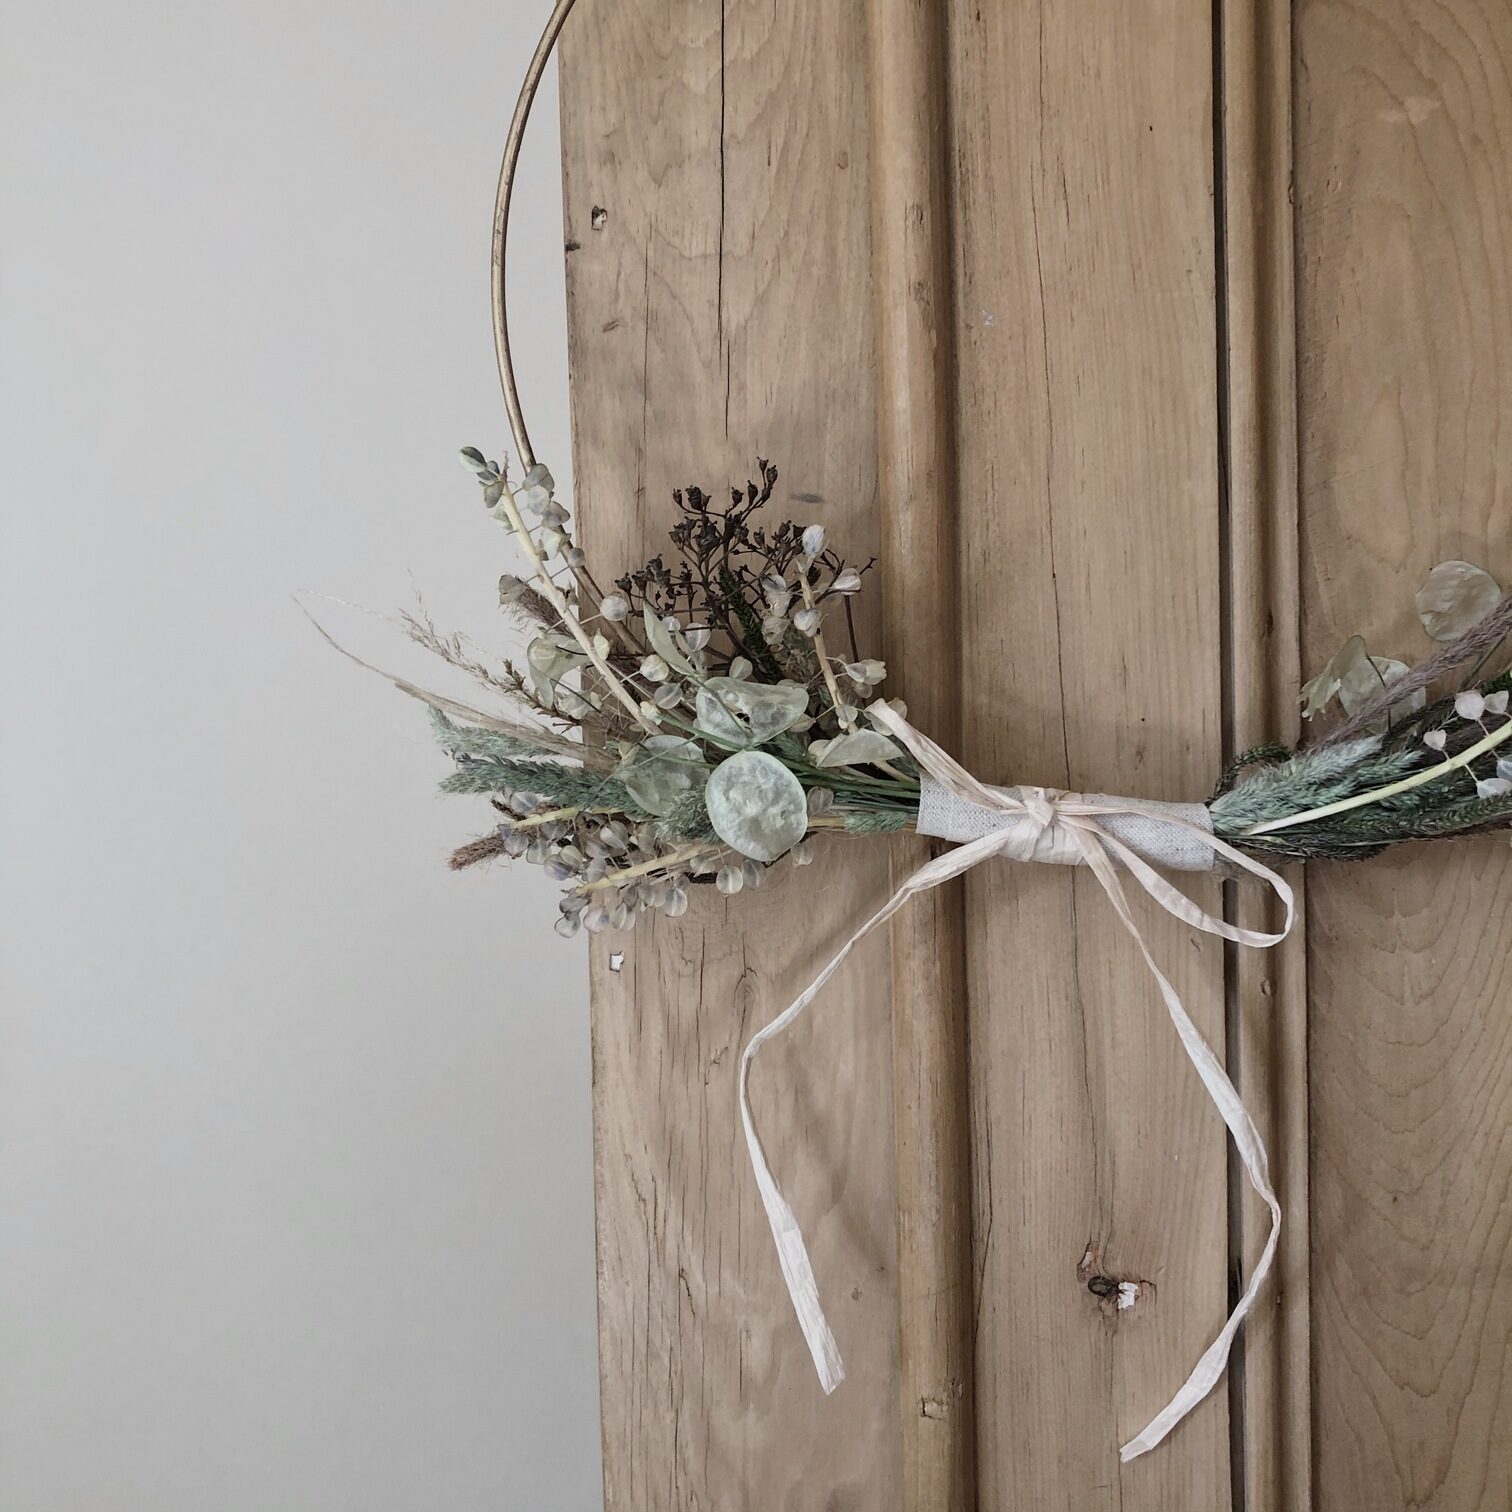 How To Make A Dried Flower Wreath - Our 8 Step Guide